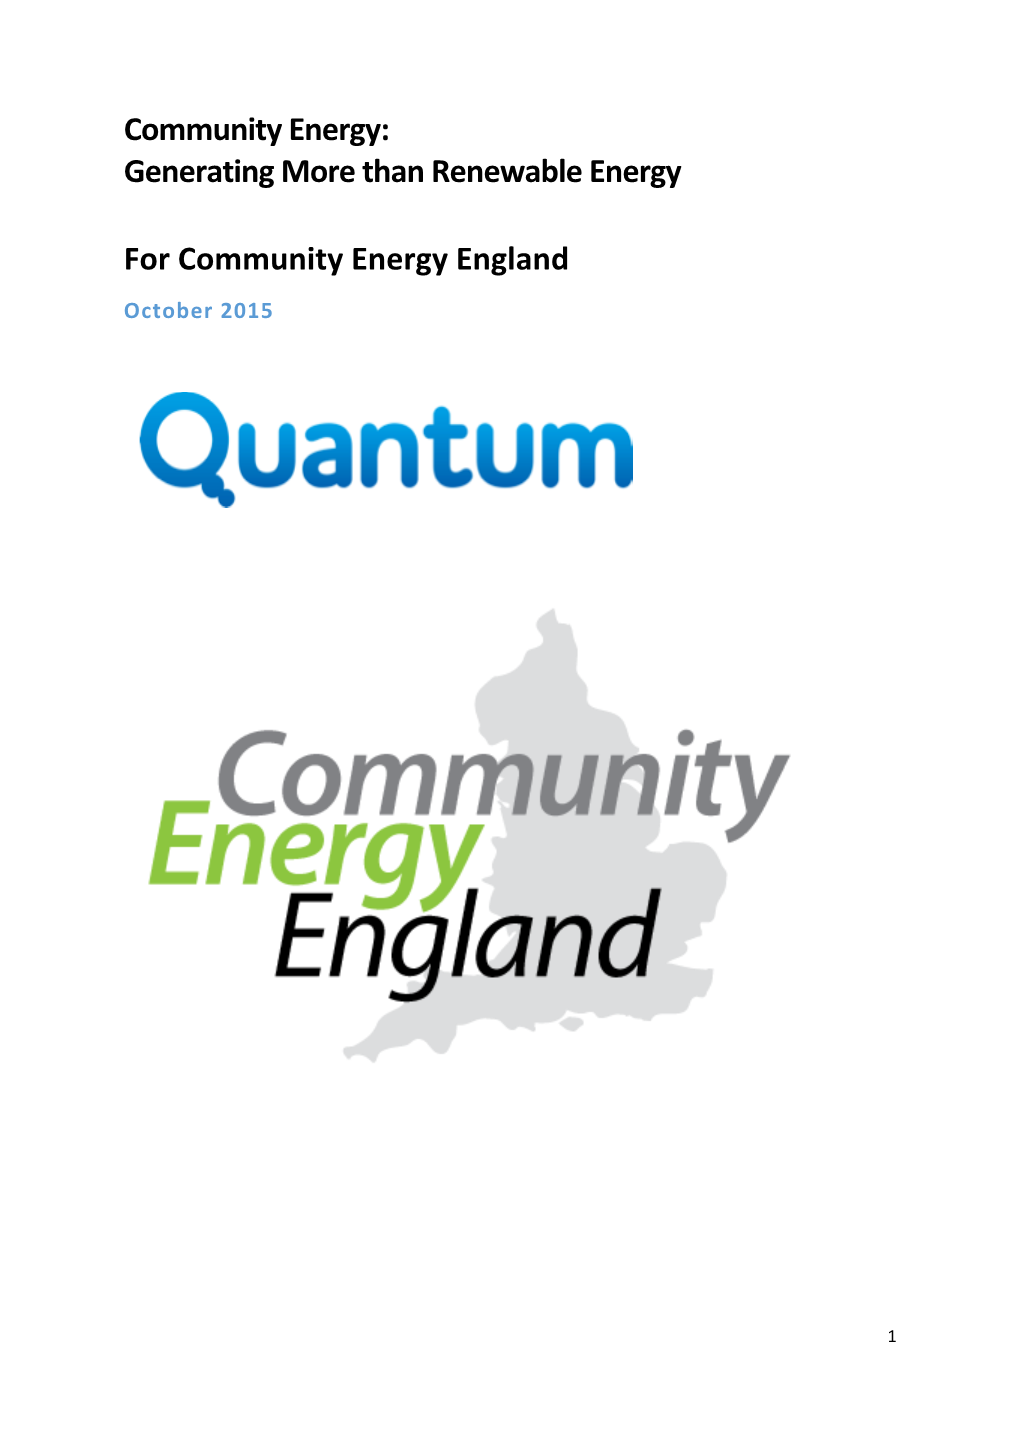 CEE Survey Fits Policy Impact on Community Energy 20151016